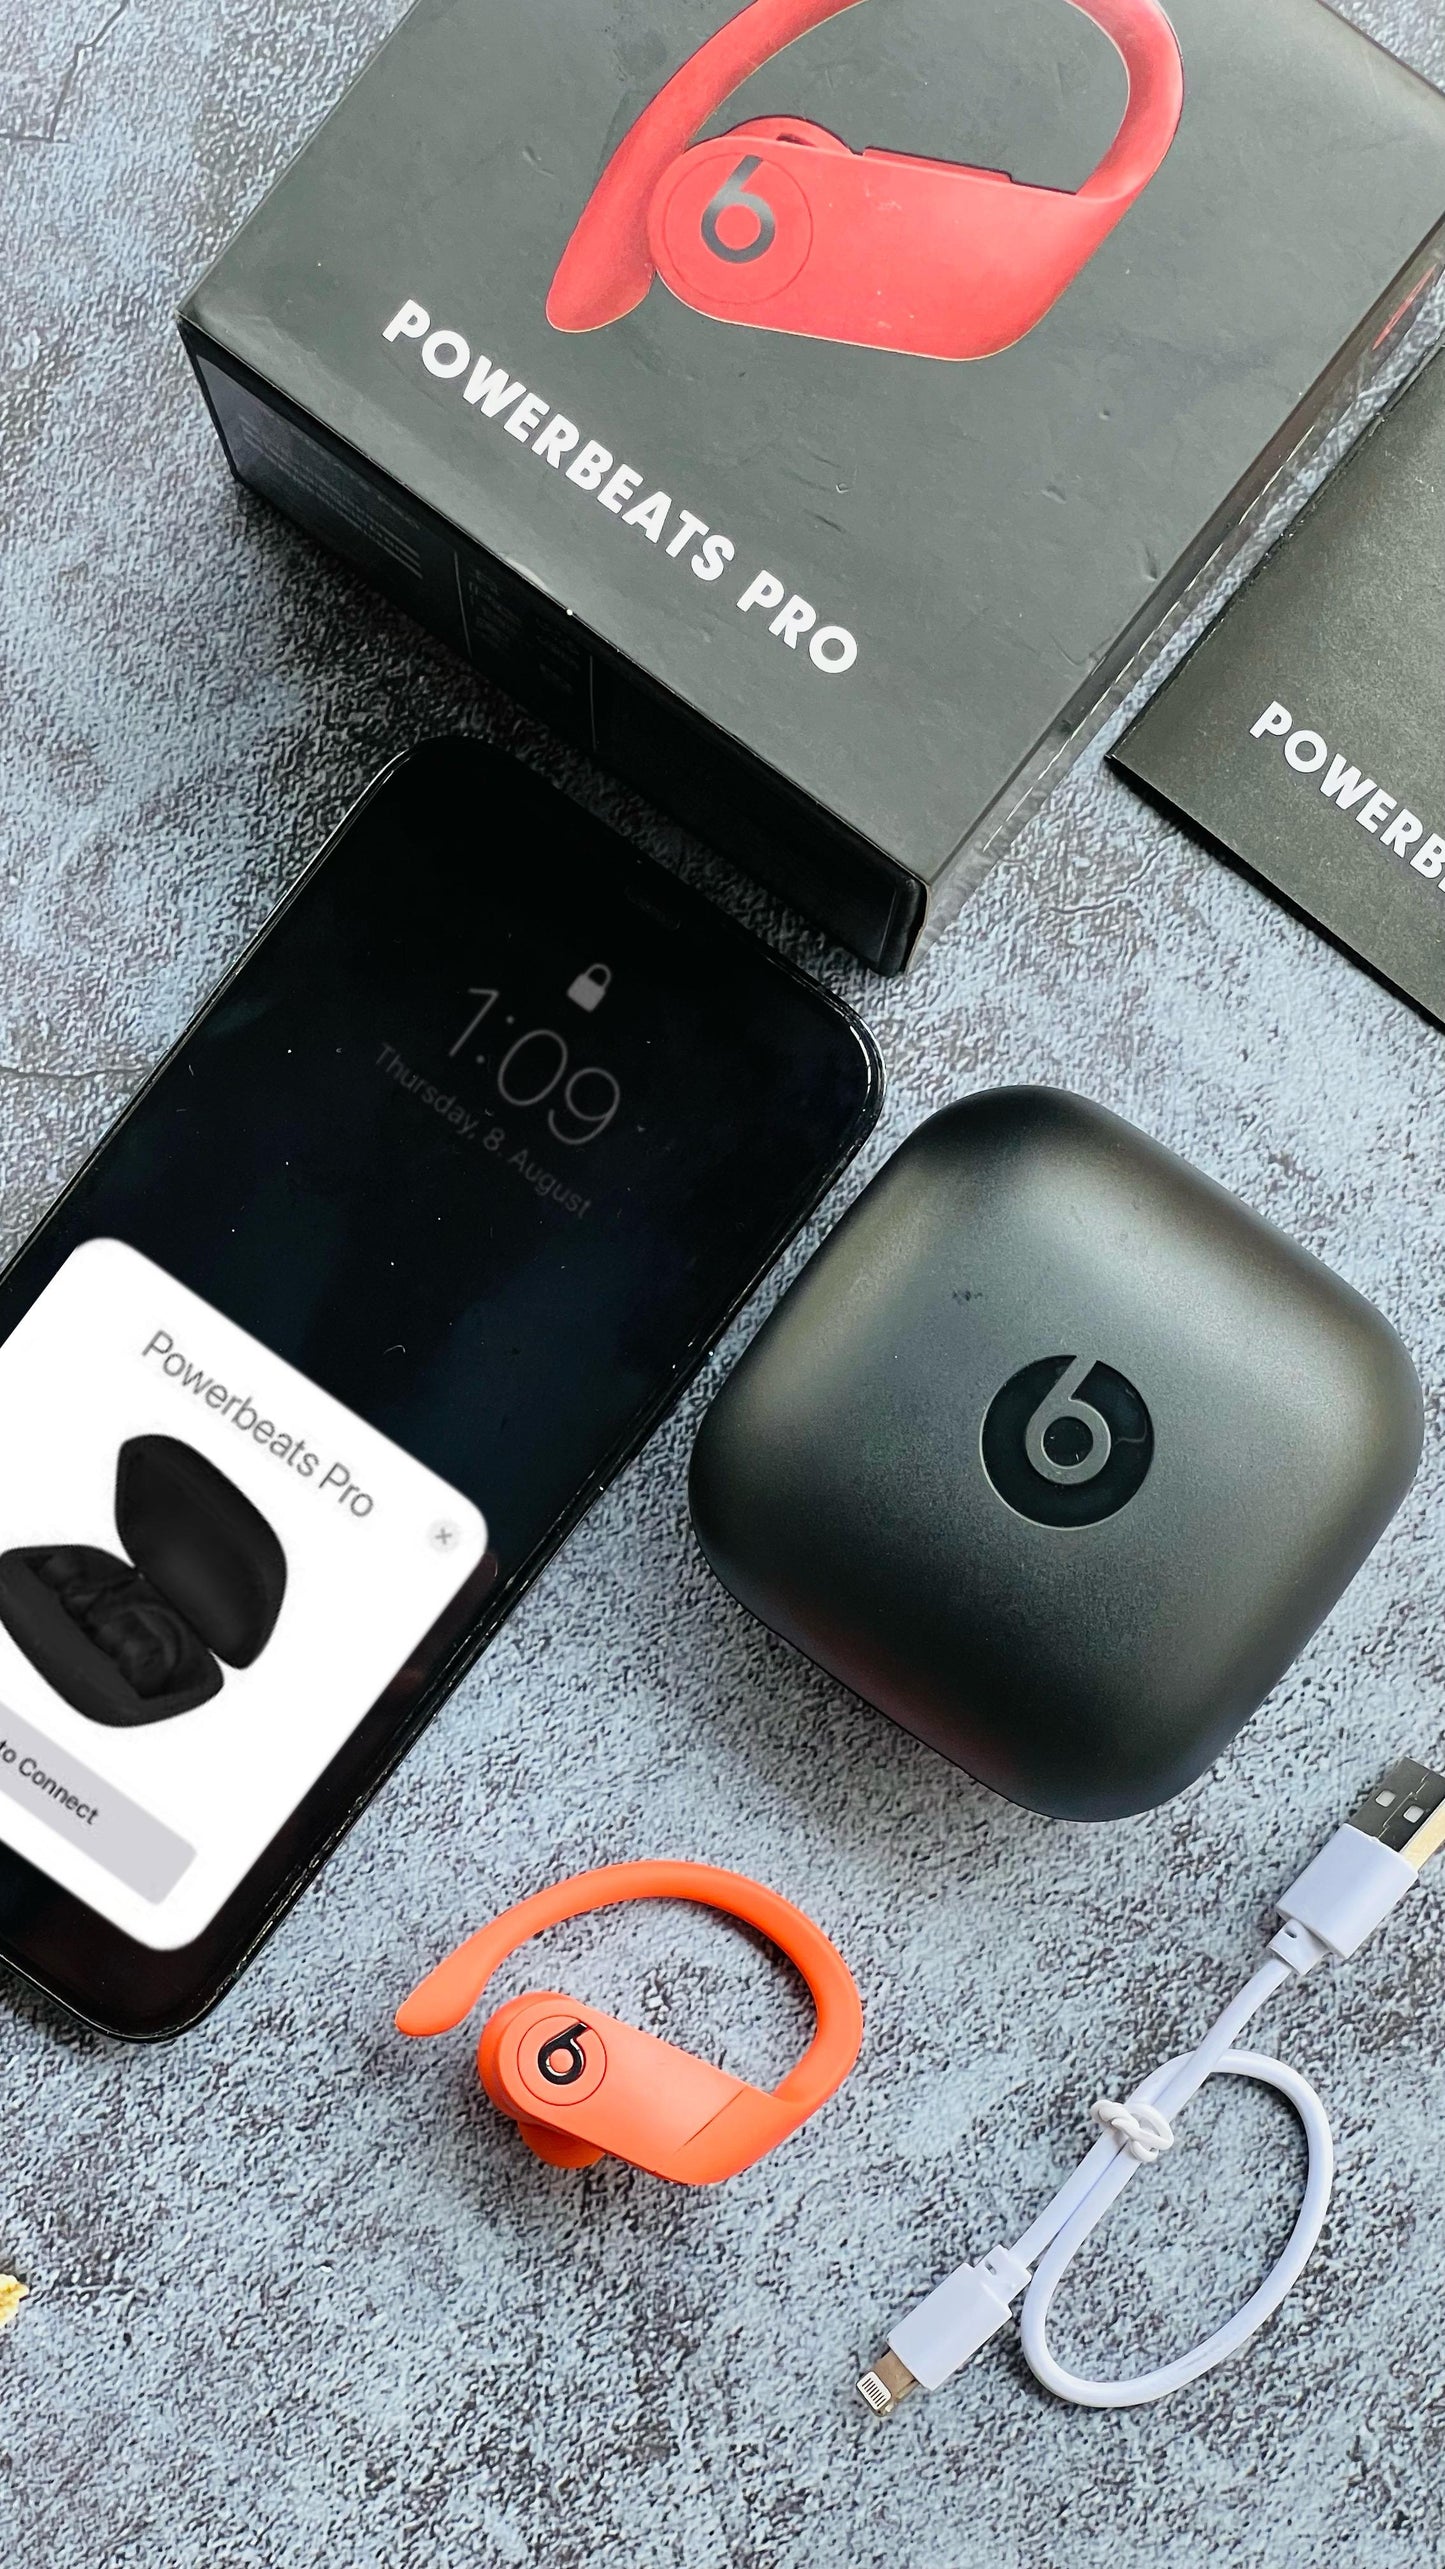 Powerbeats Pro with pop up (airpod)